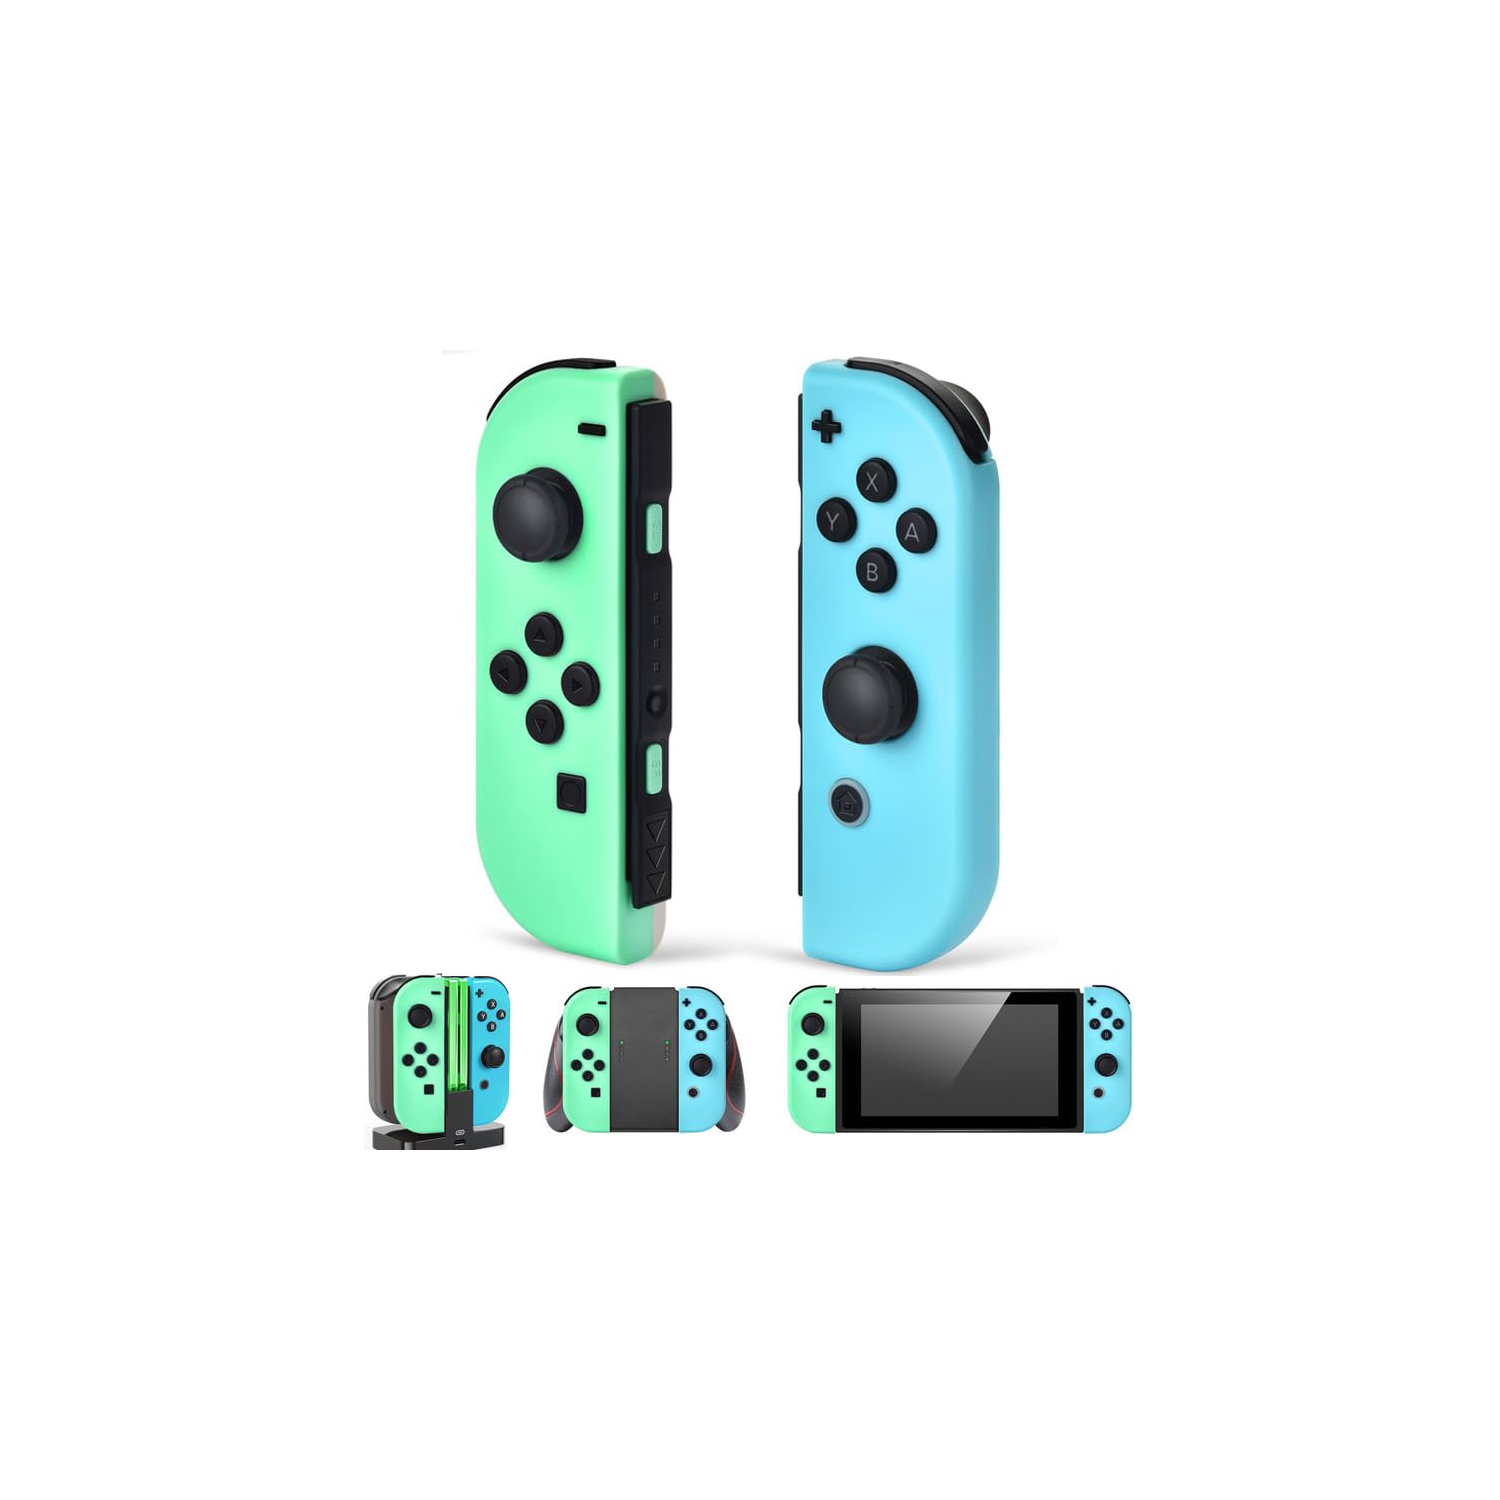 Nintendo Switch Lite/OLED Controllers - Joypad Controls with Motion Control/Wake Up/Sport Game Support - Blue Green Remote for Animal Crossing